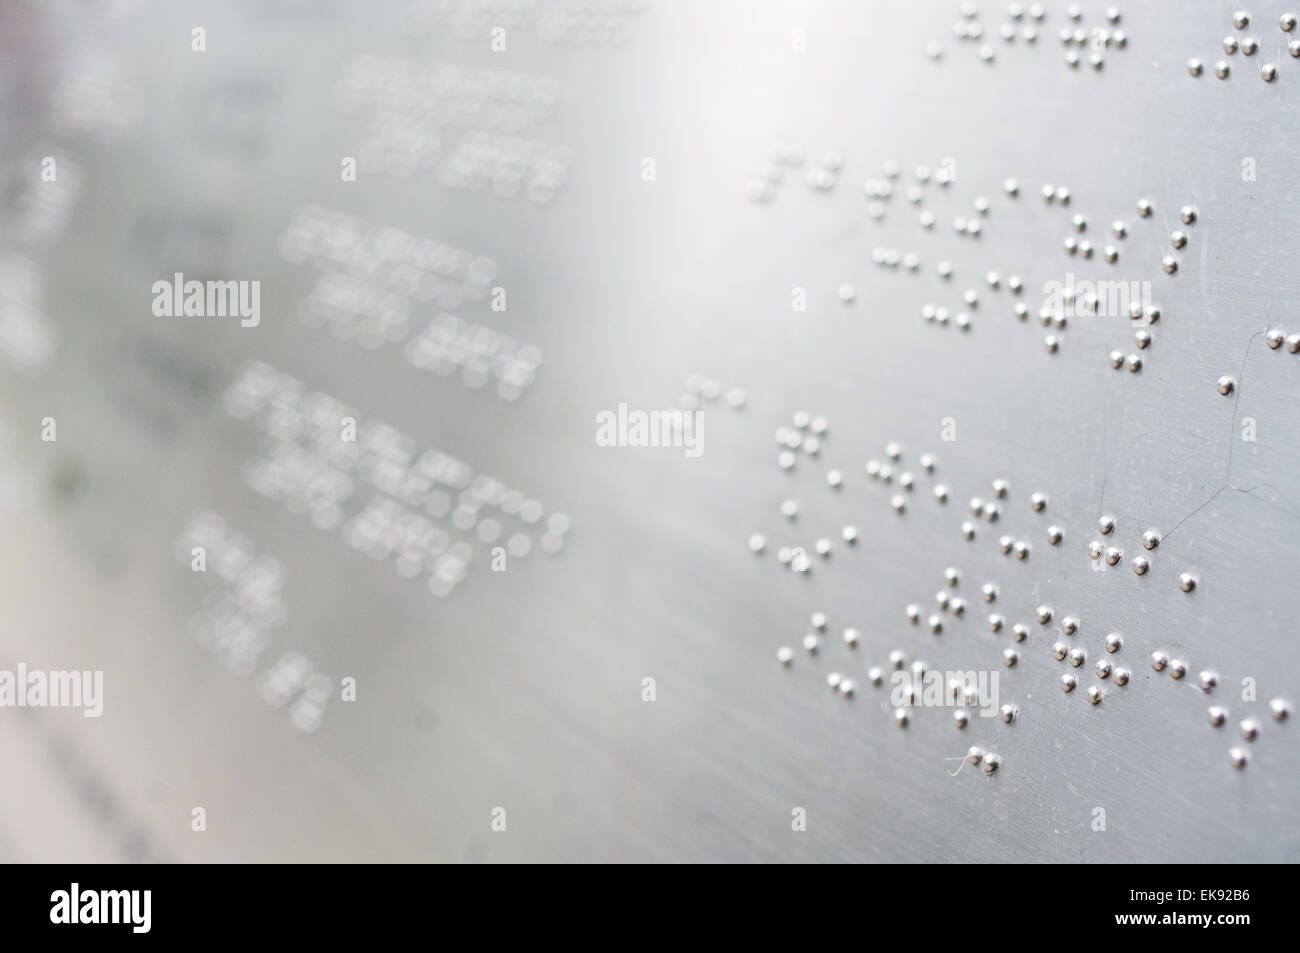 Braille reading bumps found in a park in Hong Kong. Stock Photo